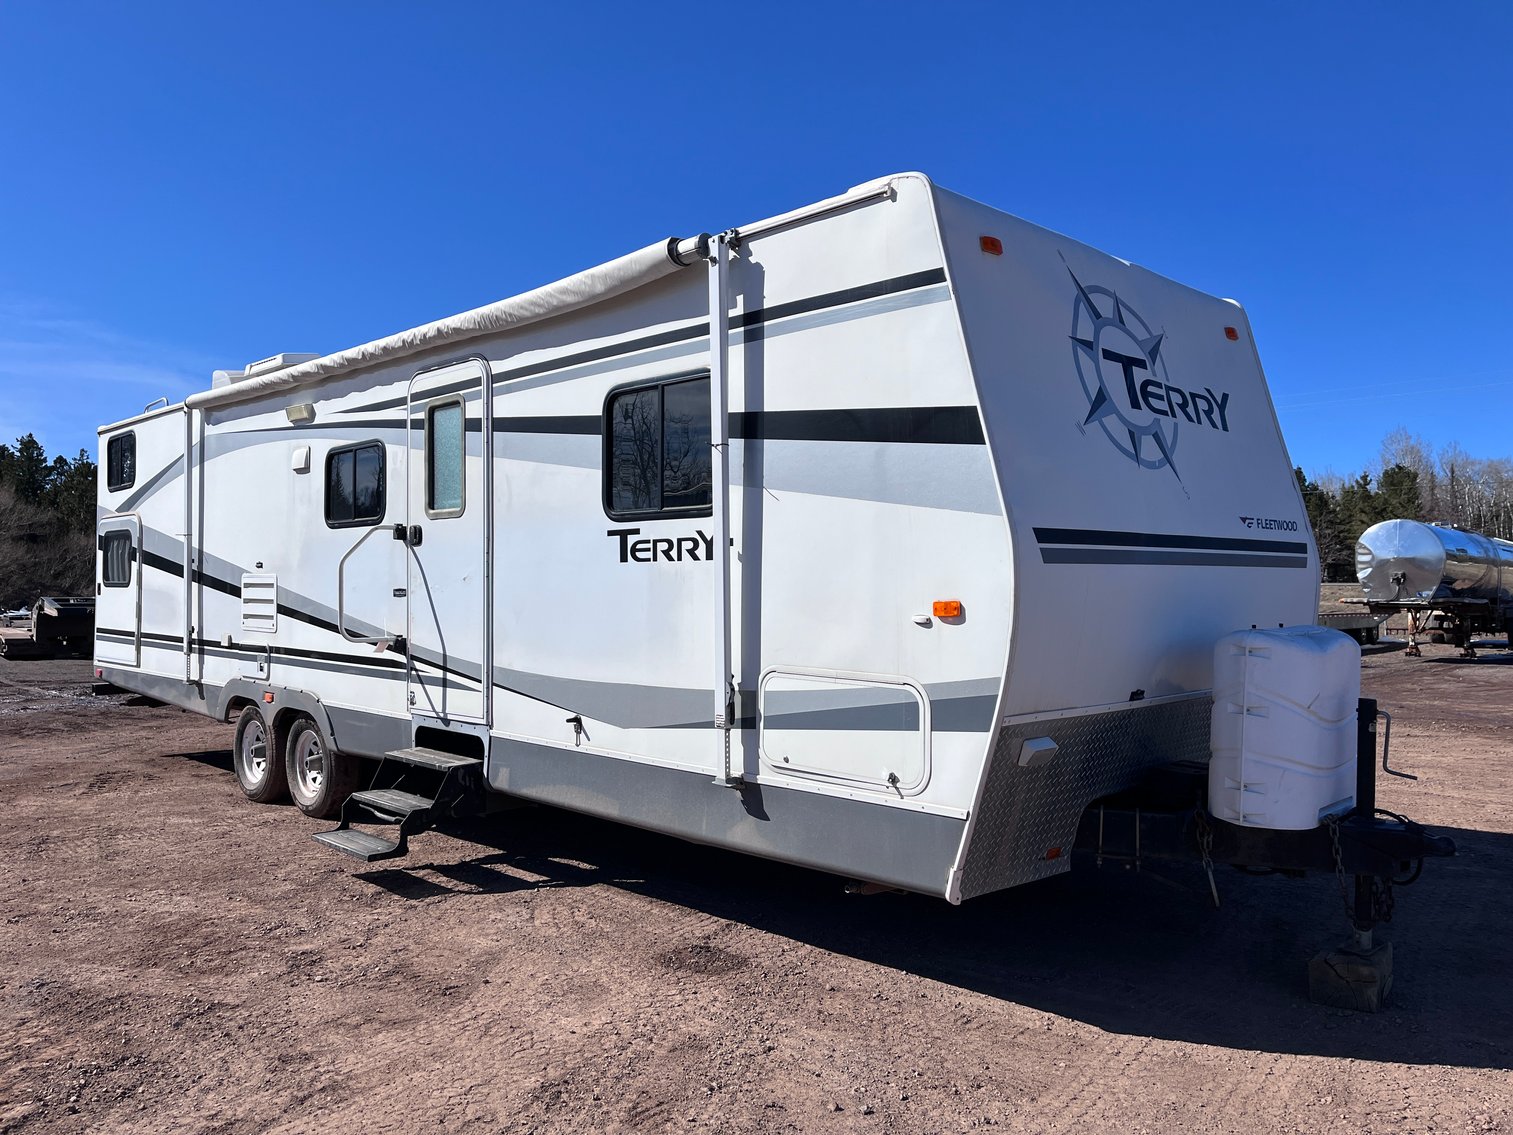 2006 Terry by Fleetwood 32' Camper, 2017 450-SX-F Dirt Bike, Motorcycle Carrier & Cable Rolls